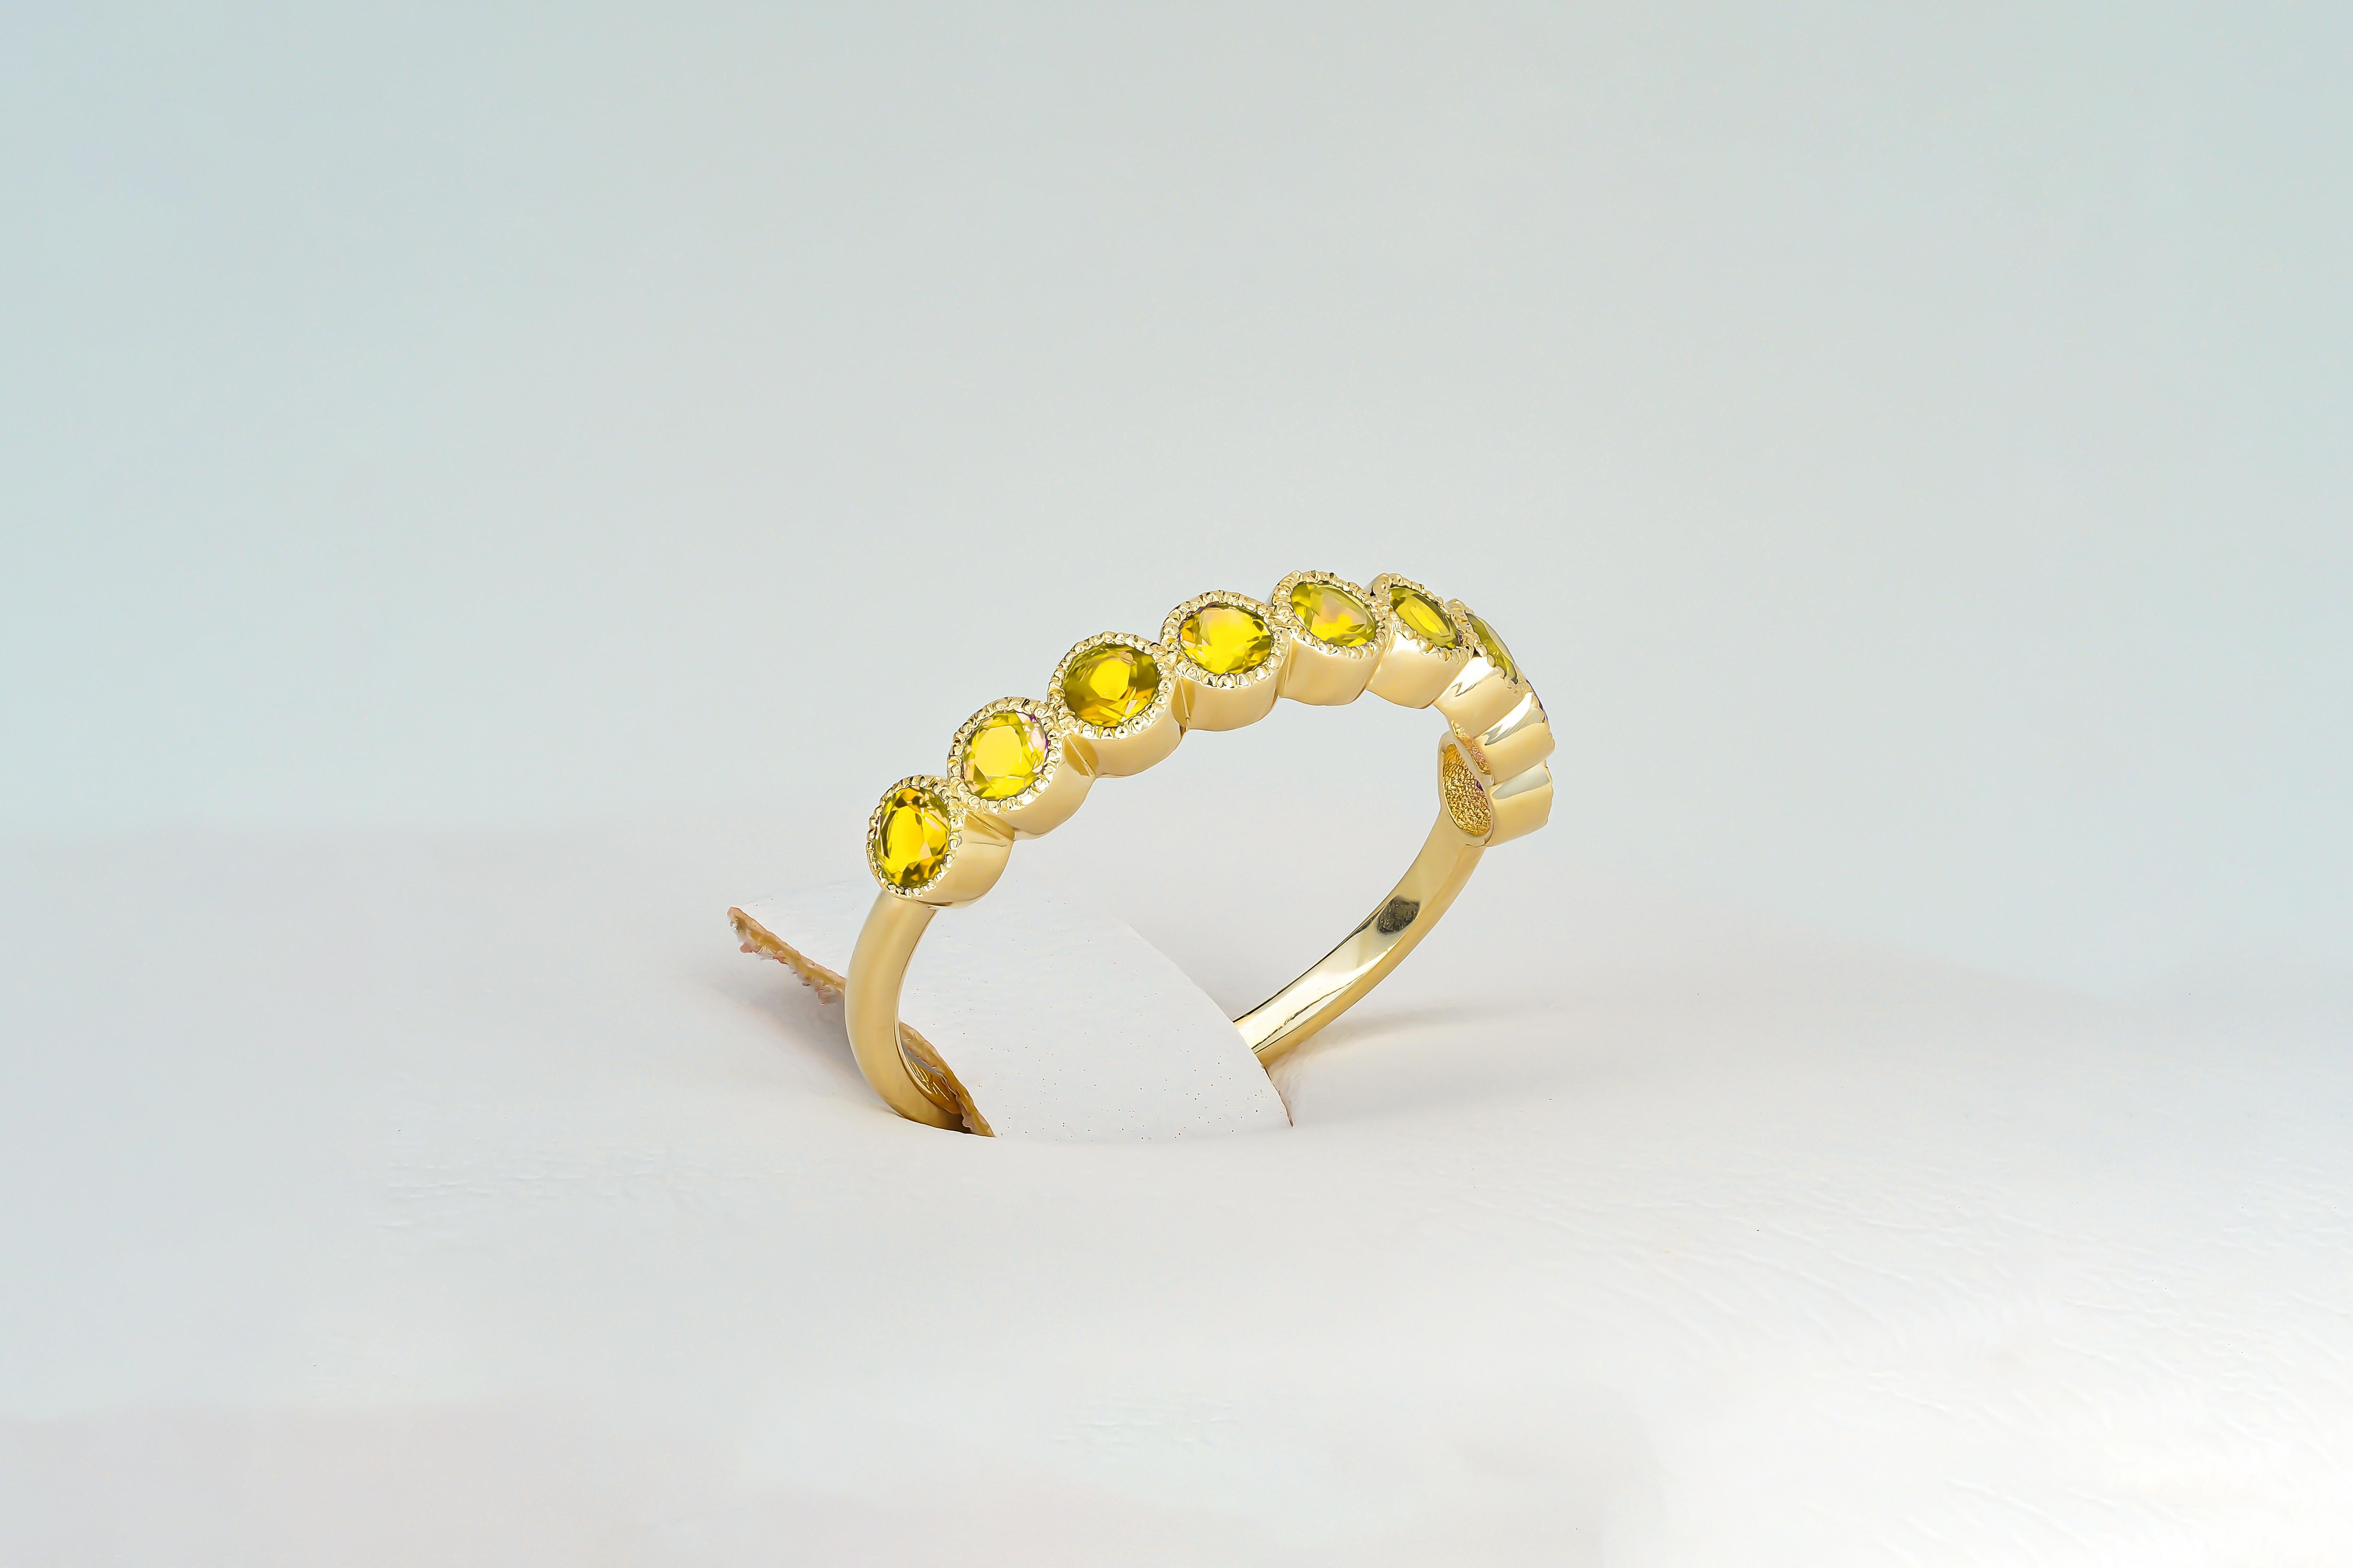 Yellow gem half eternity 14k gold ring.
Lab sapphire semi eternity ring. Round yellow gemstone gold ring. 2.5 mm lab yellow sapphire ring.

Metal: 14k gold
Weight: 1.8 gr depends from size

Gemstones:
Lab sapphires, yellow color, round cut, 2.5 mm